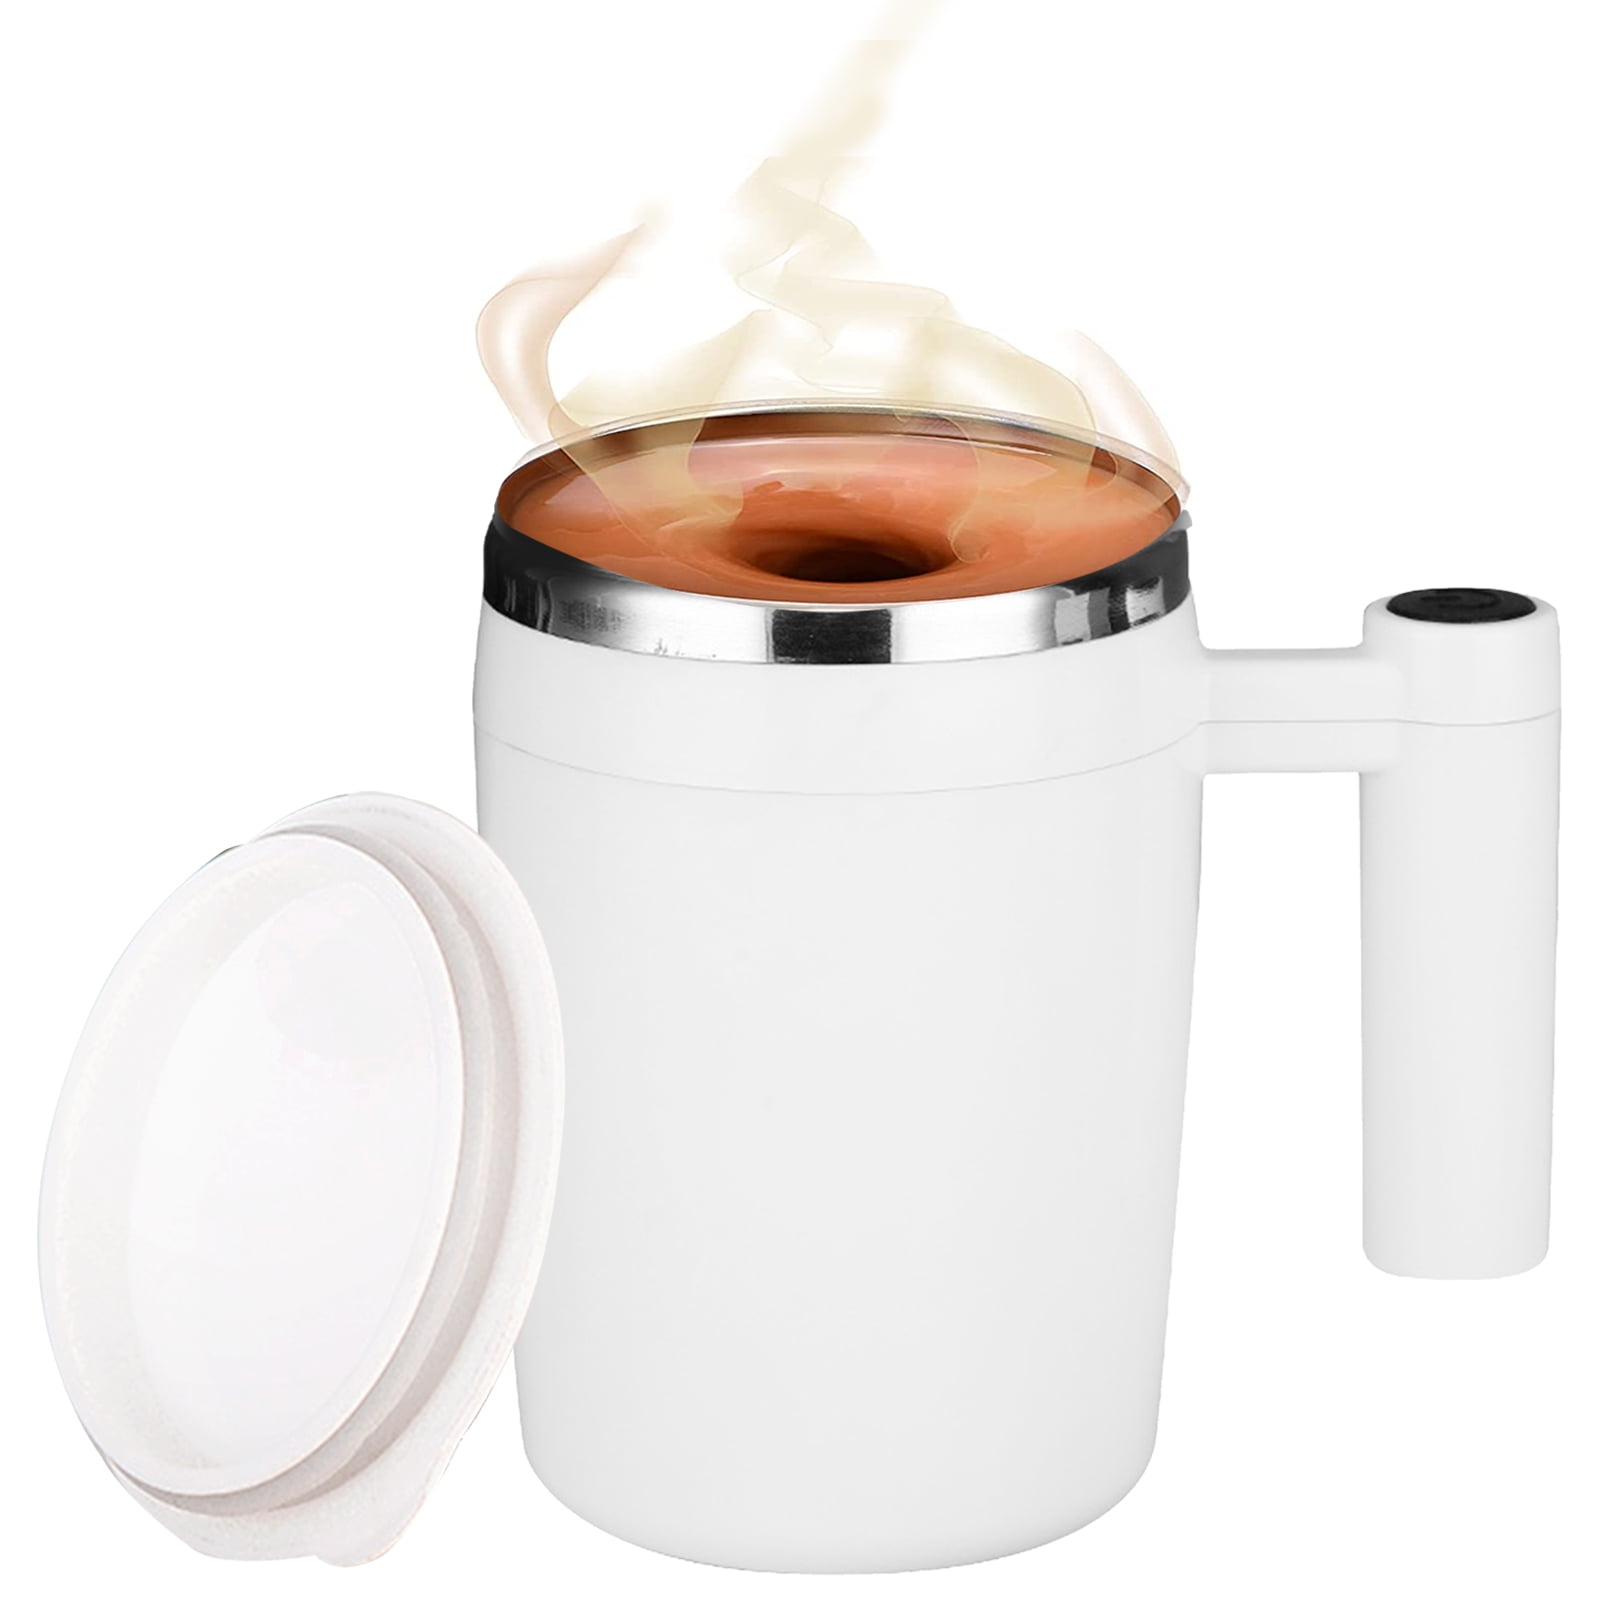 Austok Self Stirring Coffee Mug,Electric Stainless Steel Automatic Mixing Cup,USB Rechargeable Self Stirring Coffee Mug,Portable Self Mixing Coffee